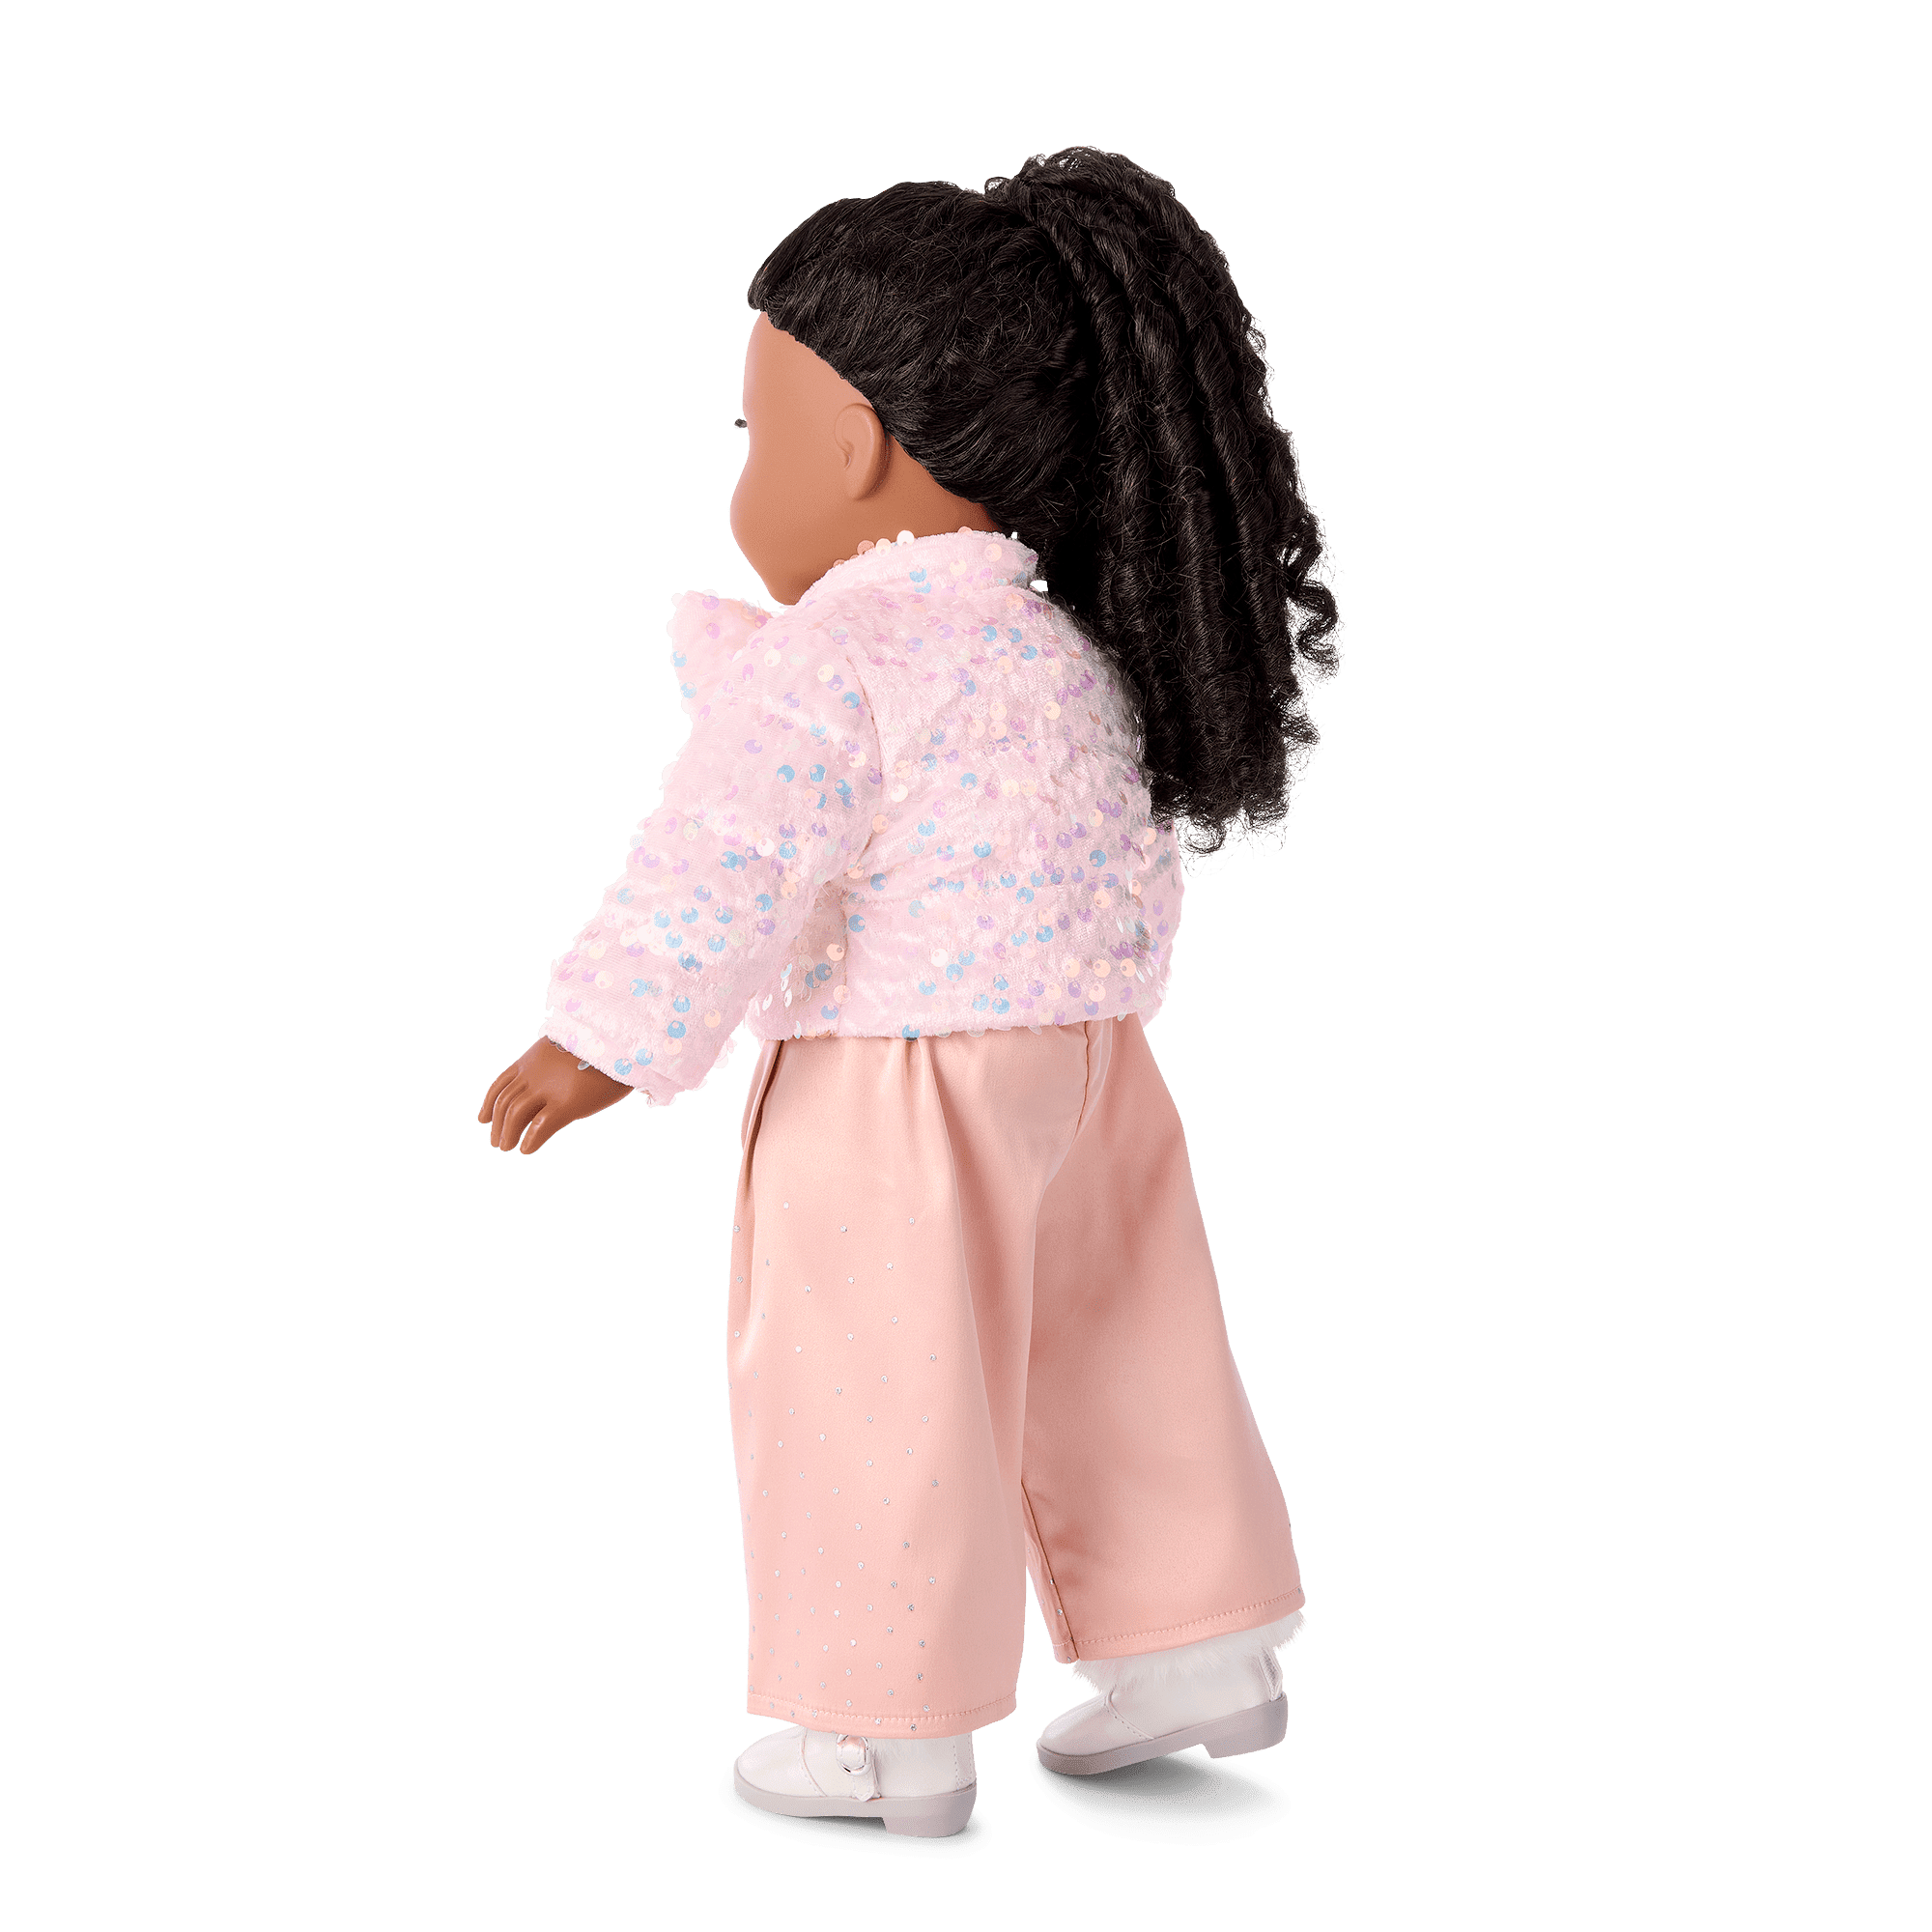 American Girl® x Something Navy Topped with a Bow Puffer Coat for 18-inch Dolls